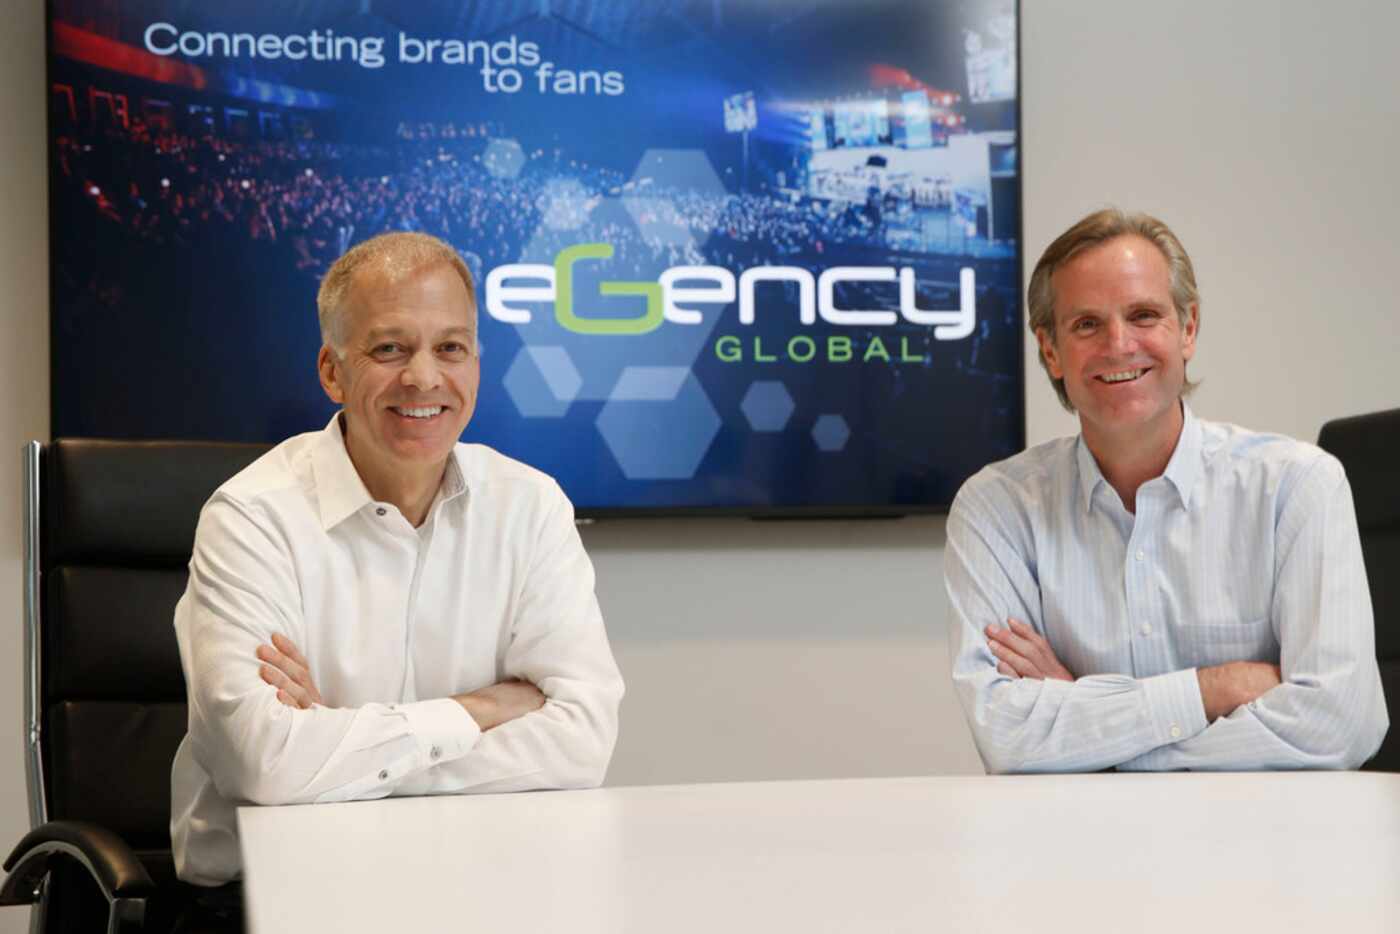 Chris Stone (left) is president and founder of the Trade Group and CEO of eGency Global....